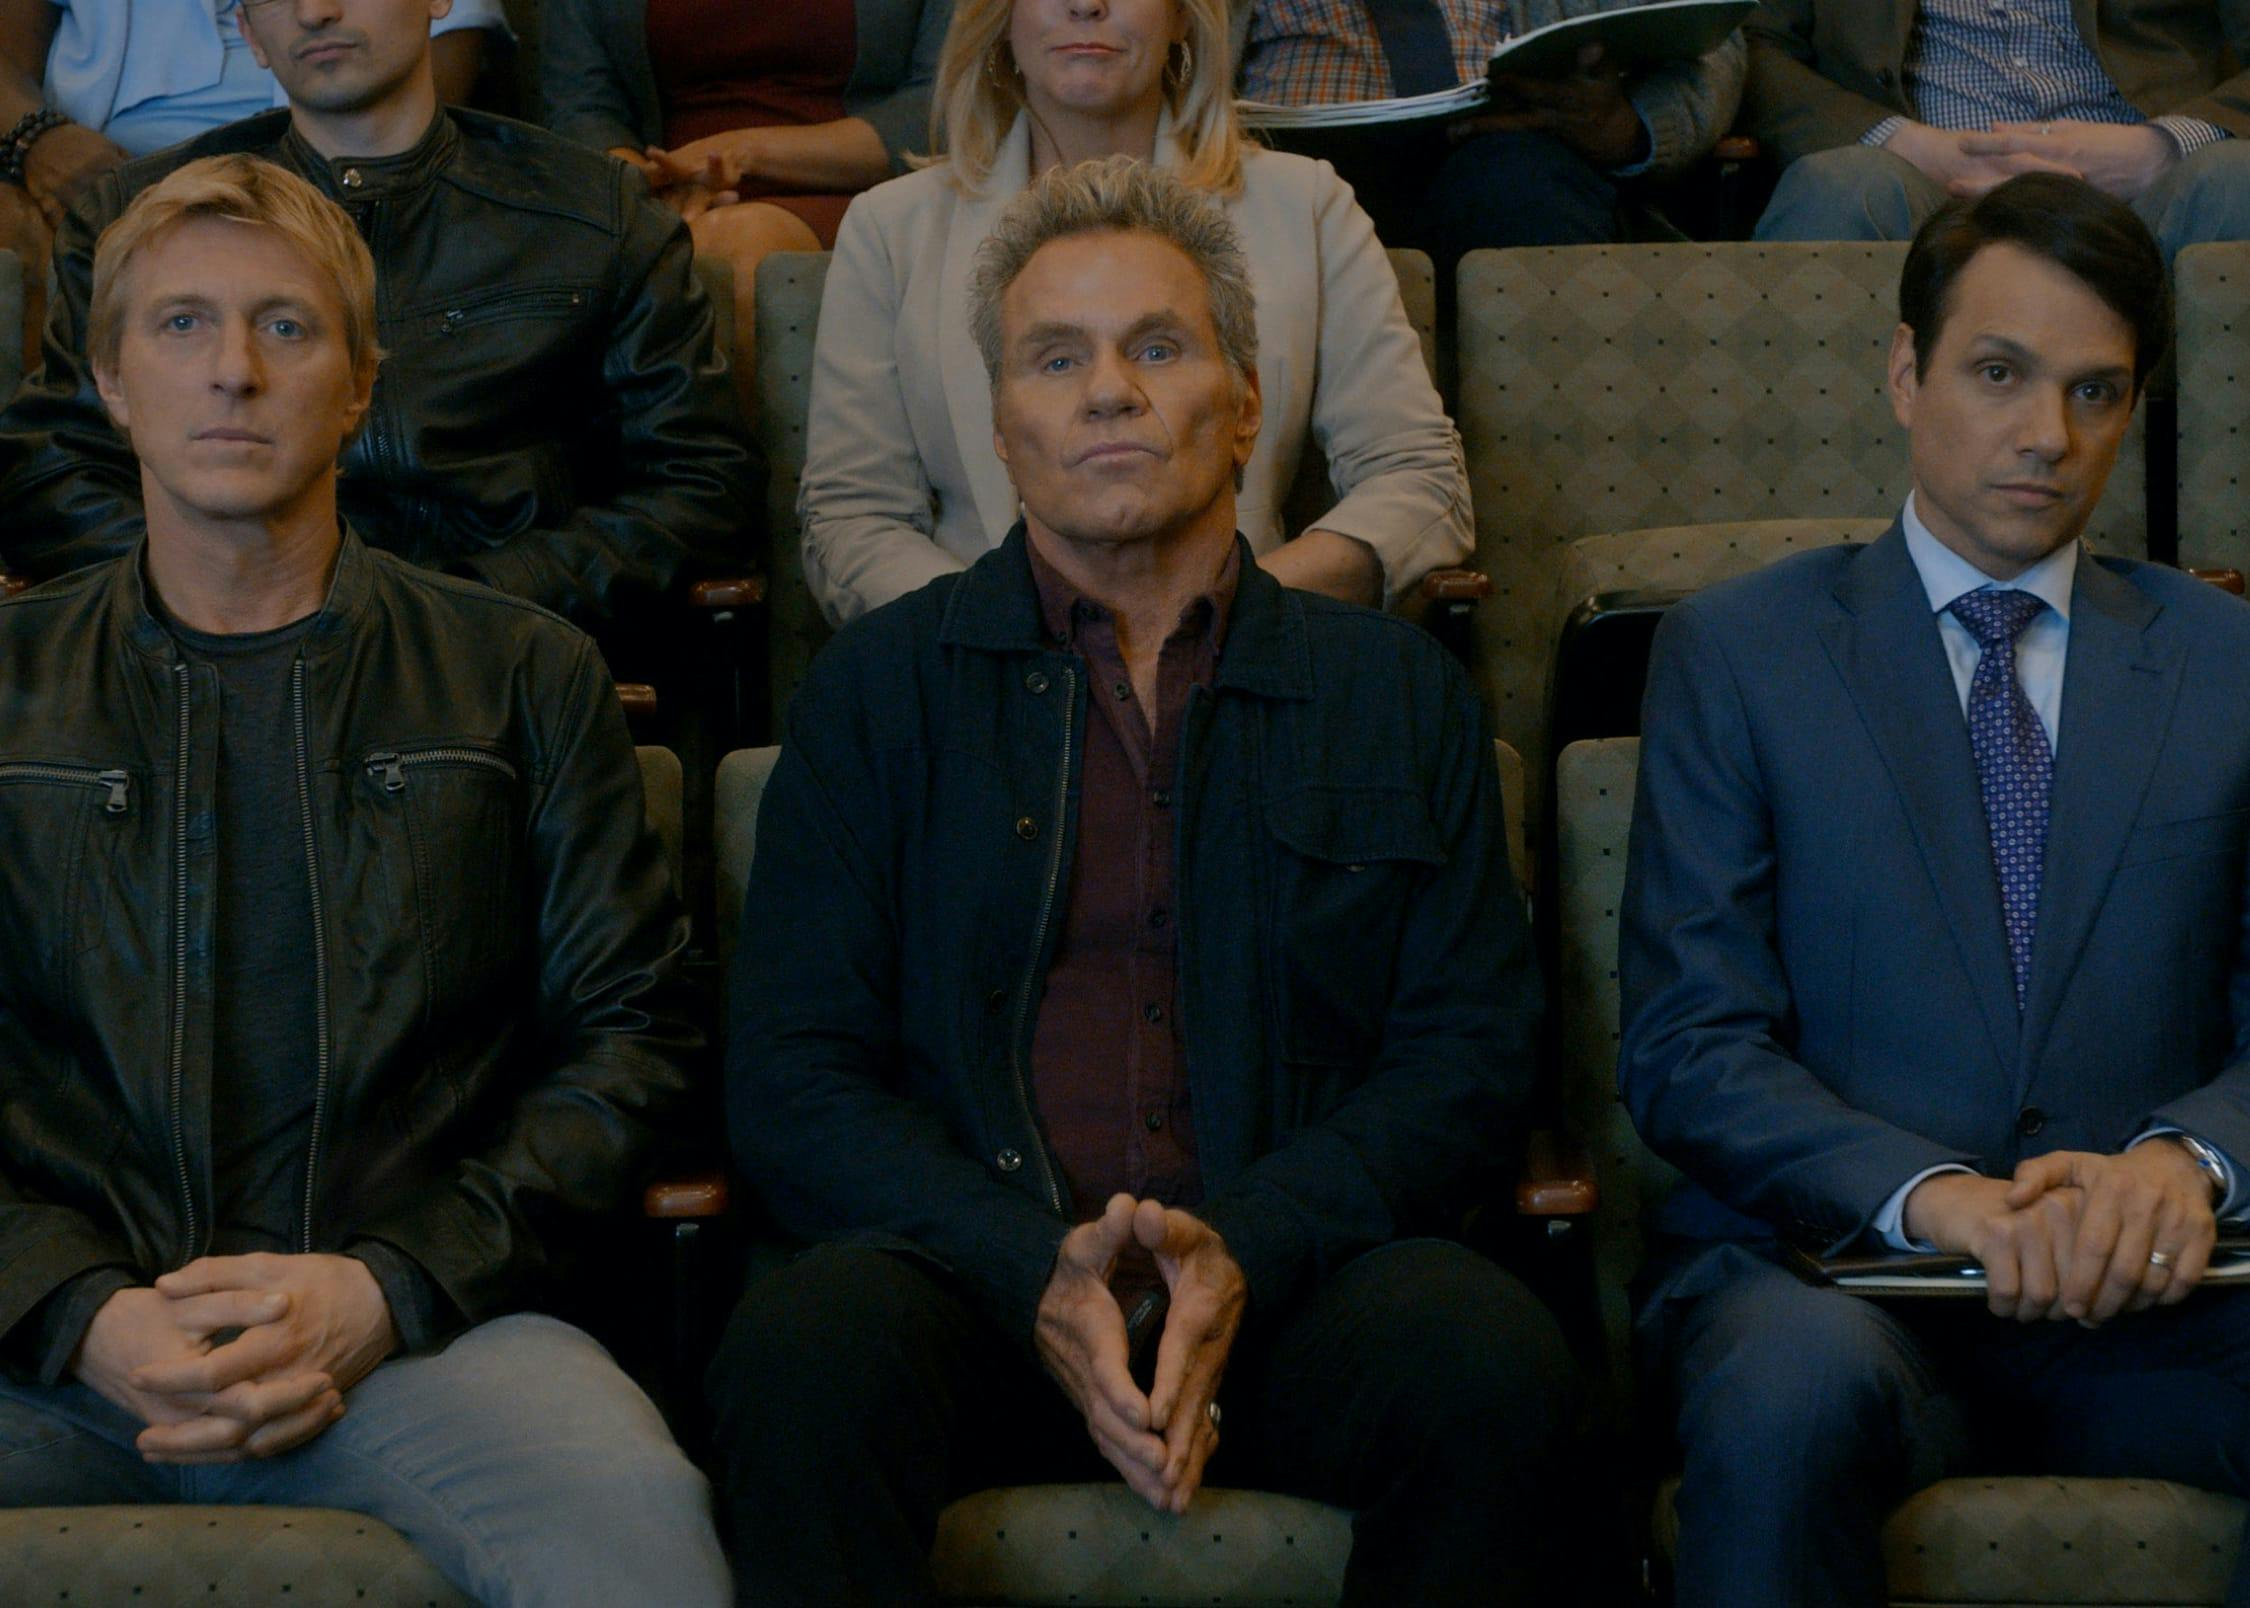 Johnny Lawrence (William Zabka), John Kreese (Martin Kove), and Daniel Larusso (Ralph Macchio) sit in chairs next to each other.